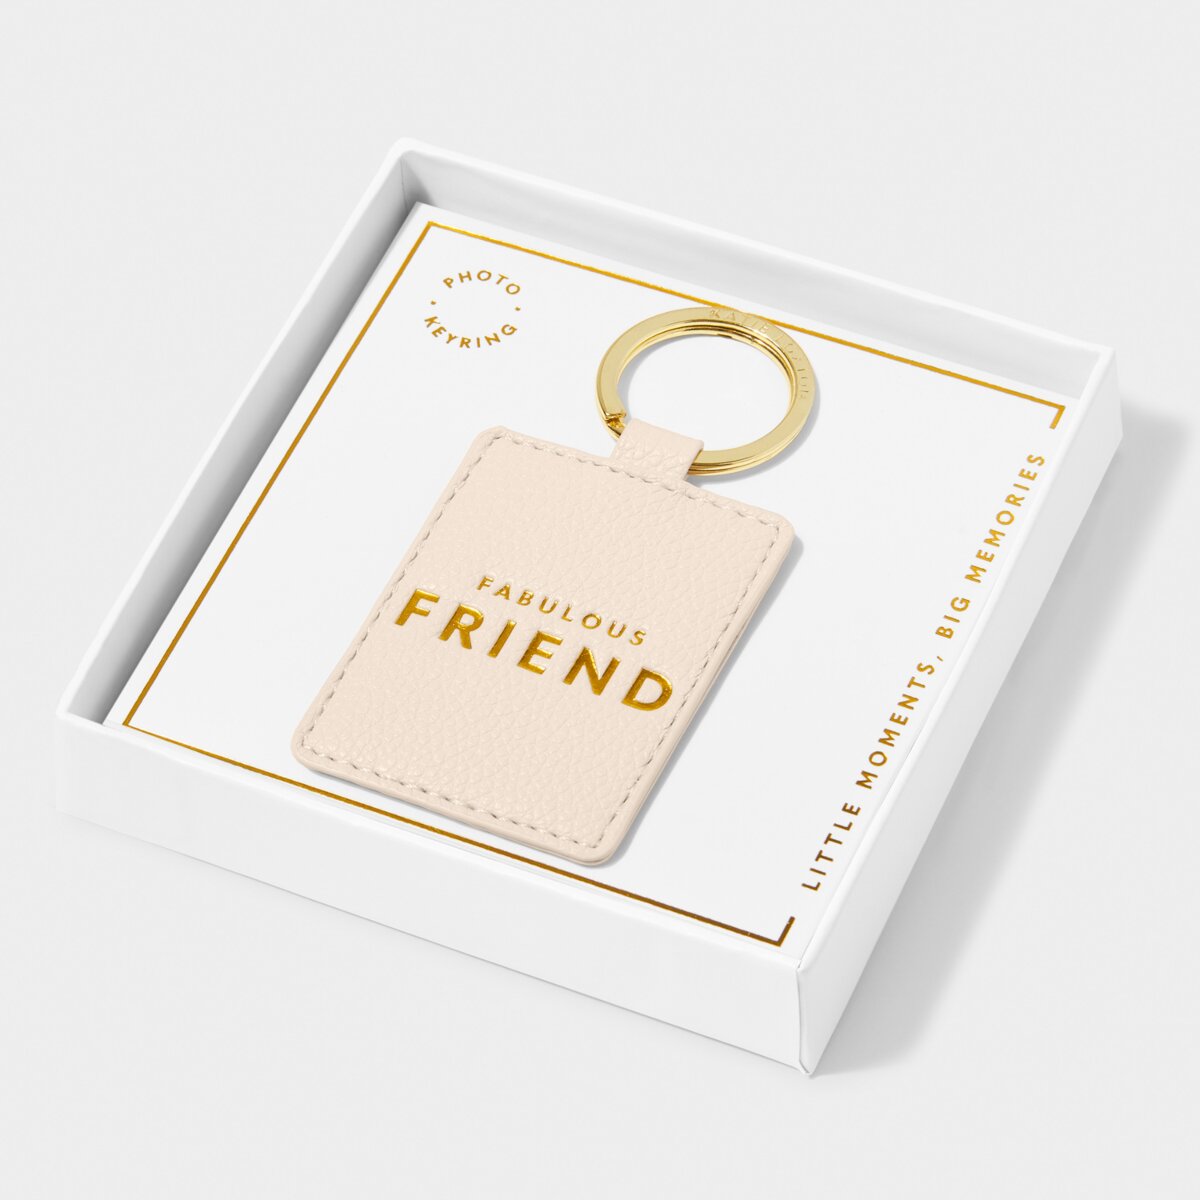 Fabulous Friend keyring in eggshell with gold lettering with photo window on back